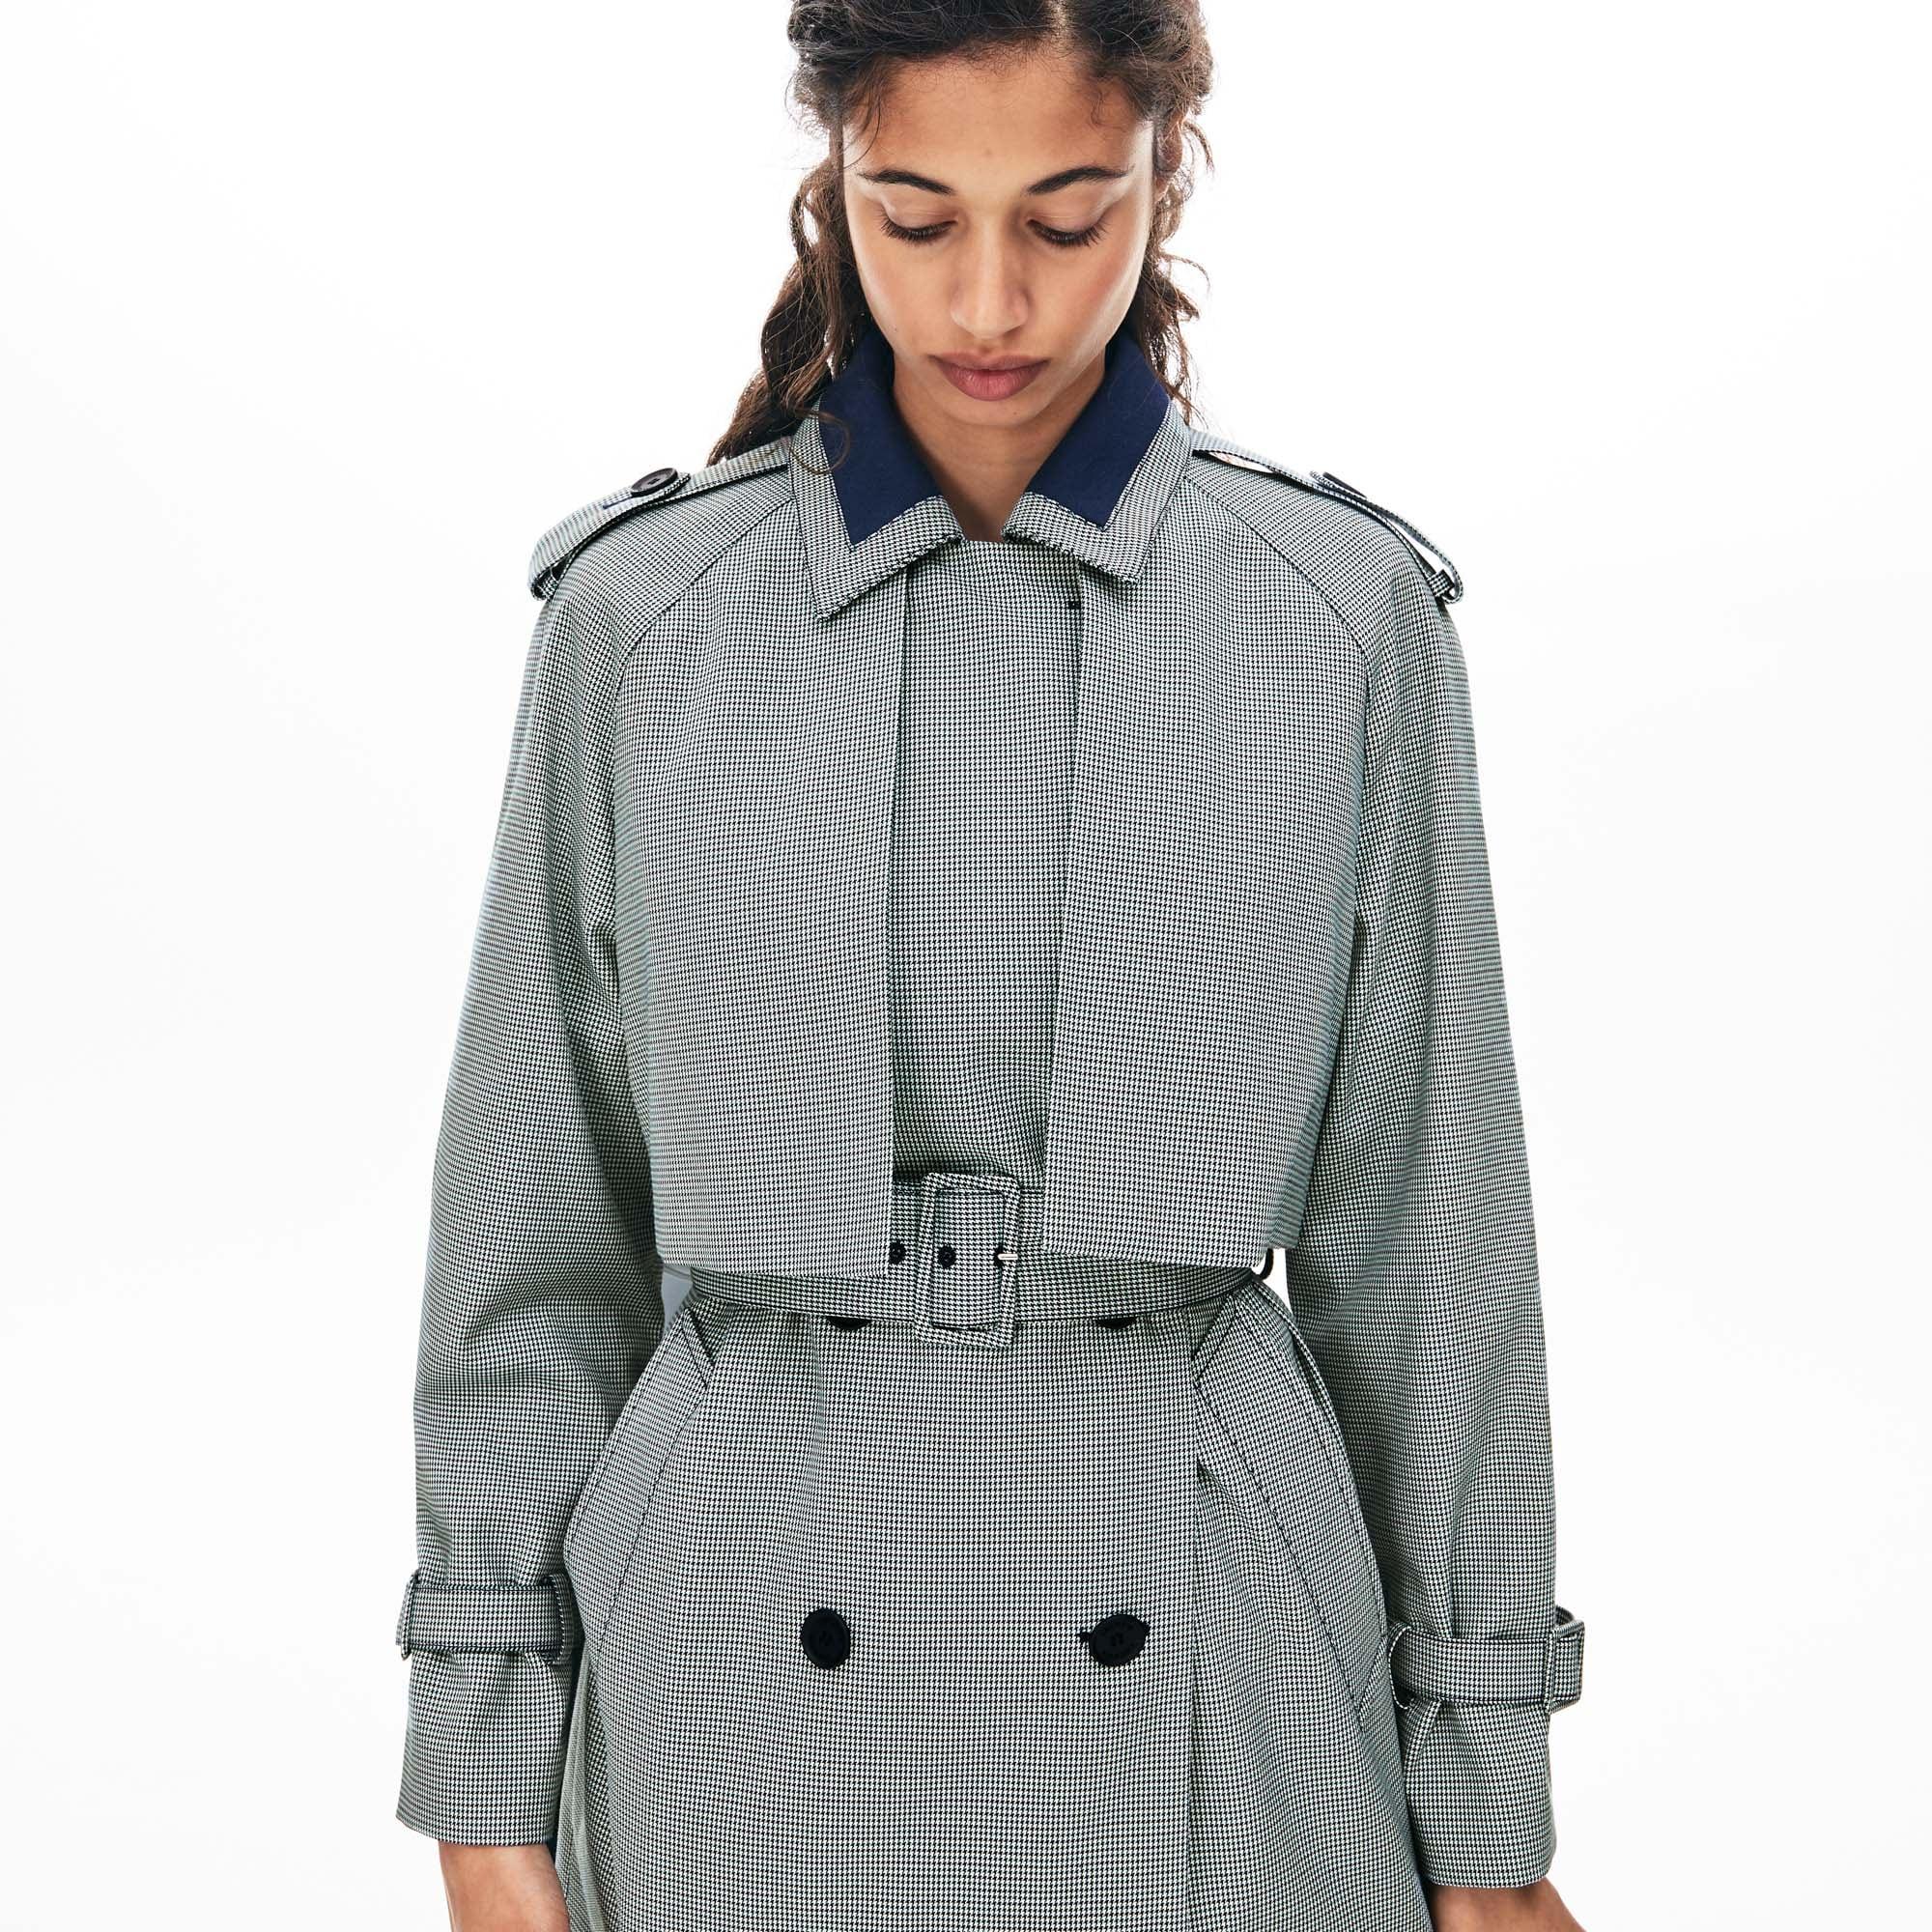 lacoste trench coat